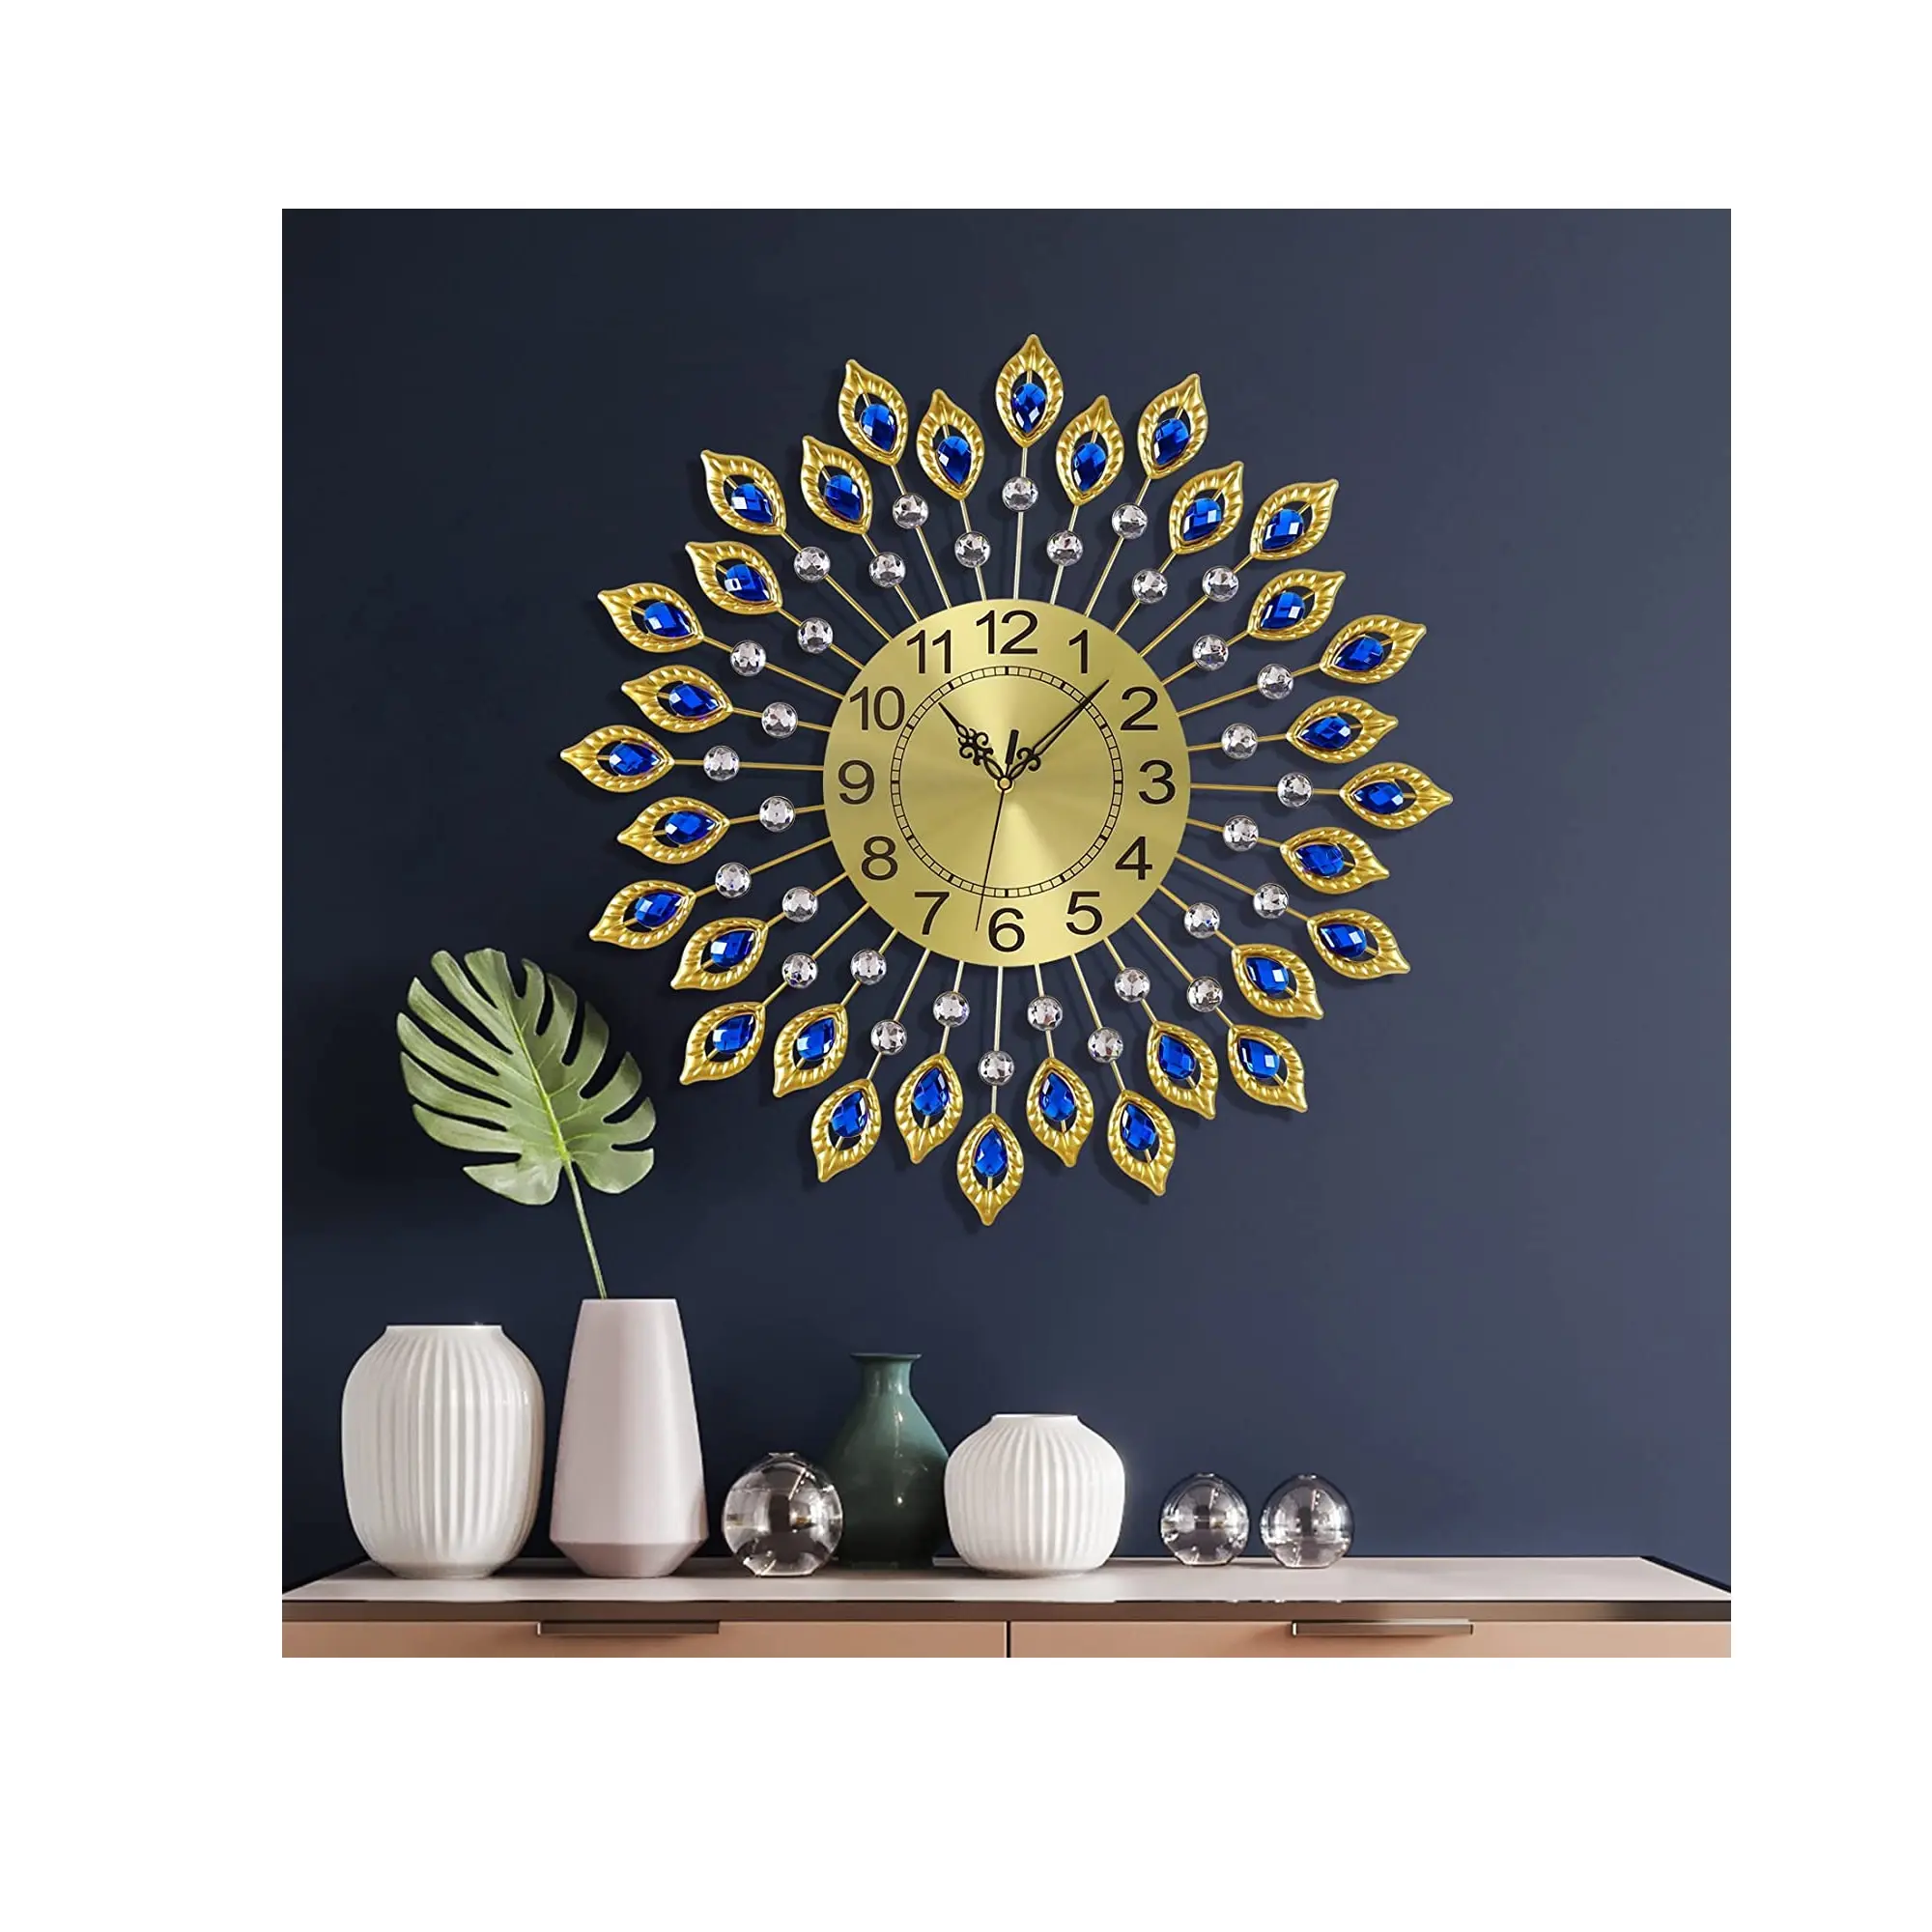 21.3 Inch Gold Wall Clocks for Living Room Decor Large Elegant Modern Wall Clock with Dial Arabic Numerals Non-Ticking Silent